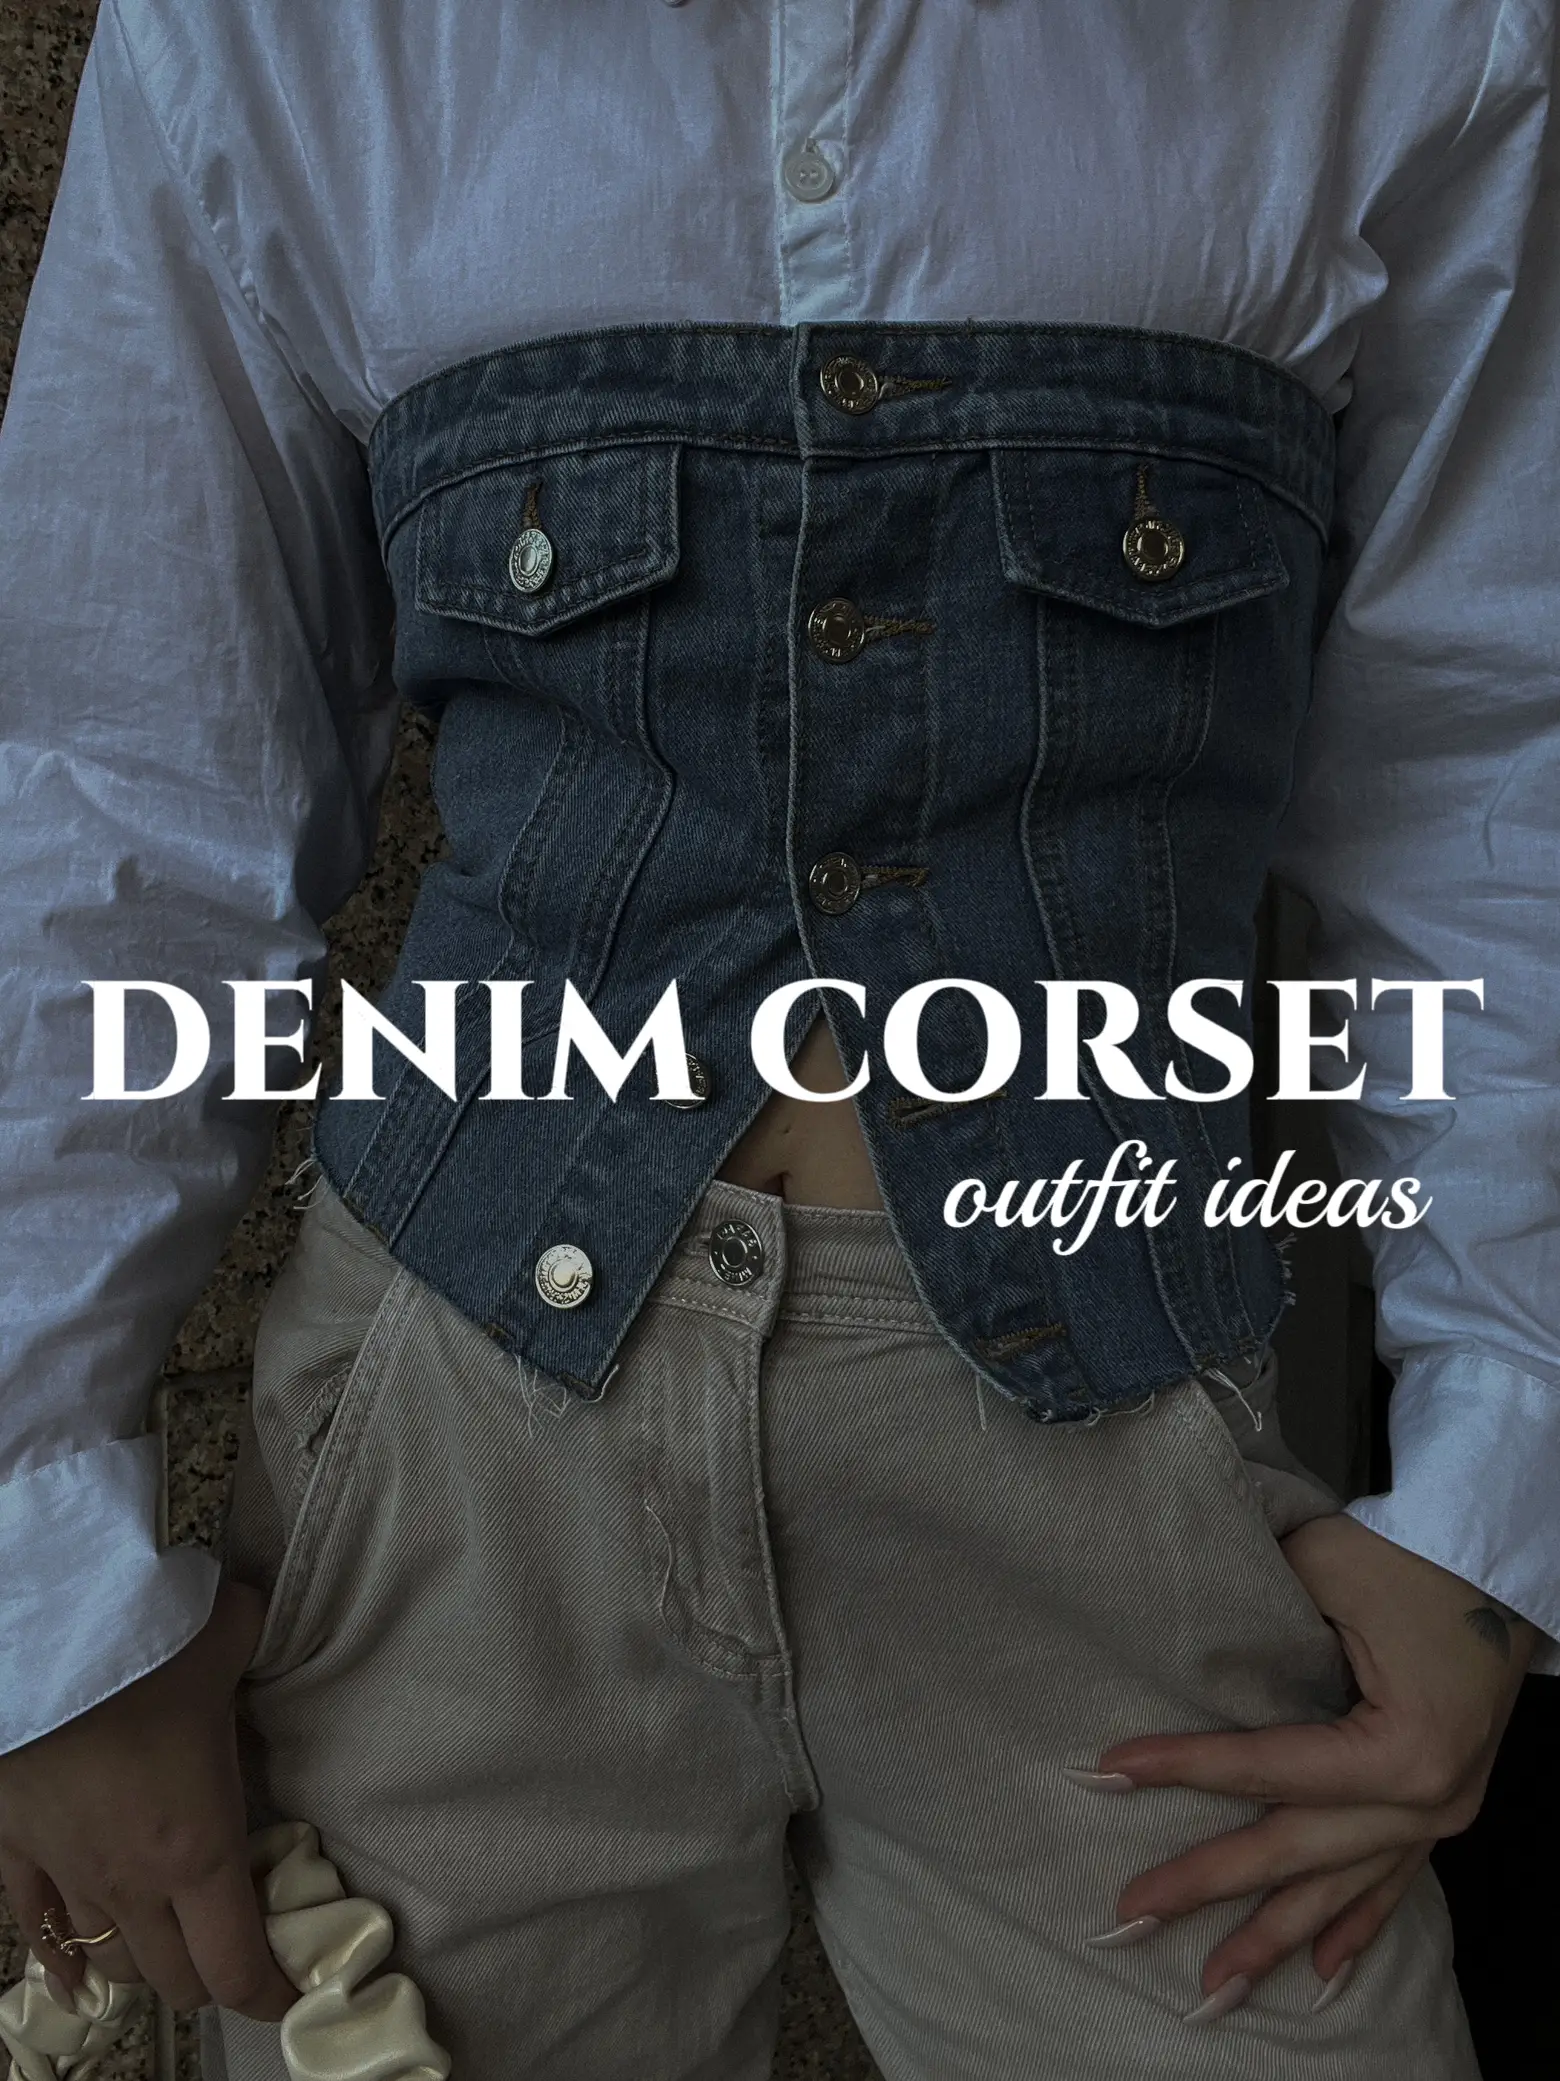 TREND ALERT: How To Style A Denim Corset Top! ✨